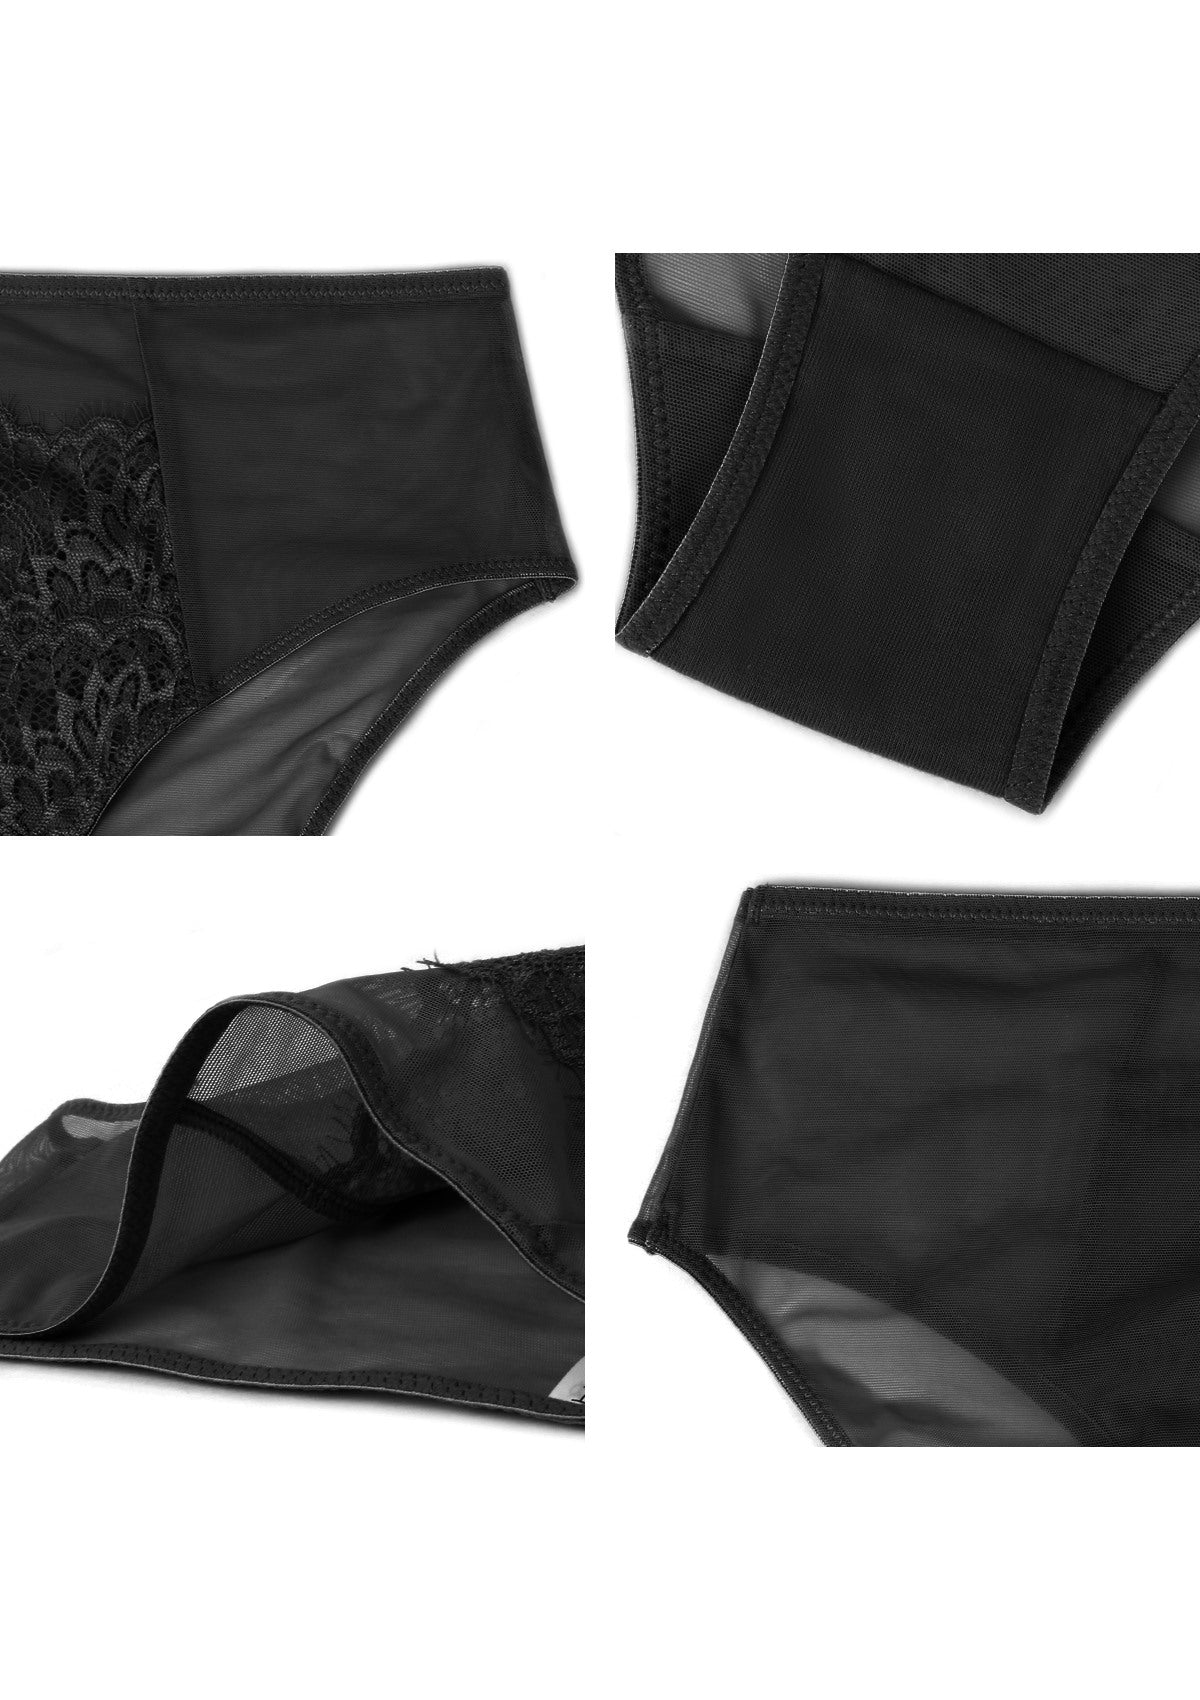 HSIA Spring Romance High-Rise Floral Lacy Panty-Comfort In Style - XXL / Black